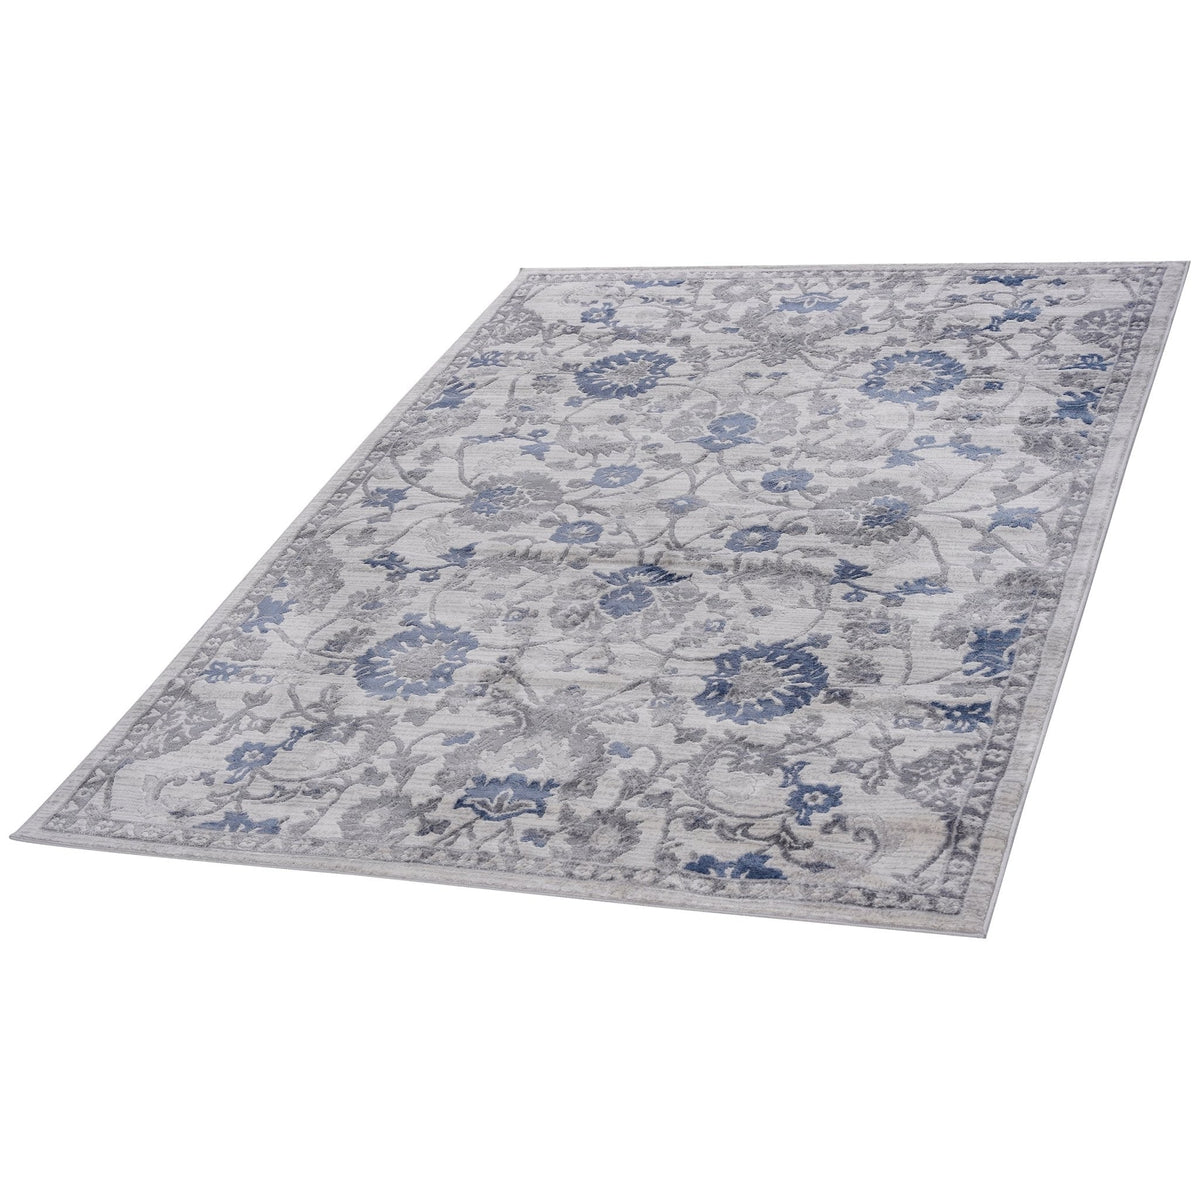 Marfi Blue - Silver Rug Size 5'3'' x 7'6'' | Mid in Mod | Houston TX | Best Furniture stores in Houston